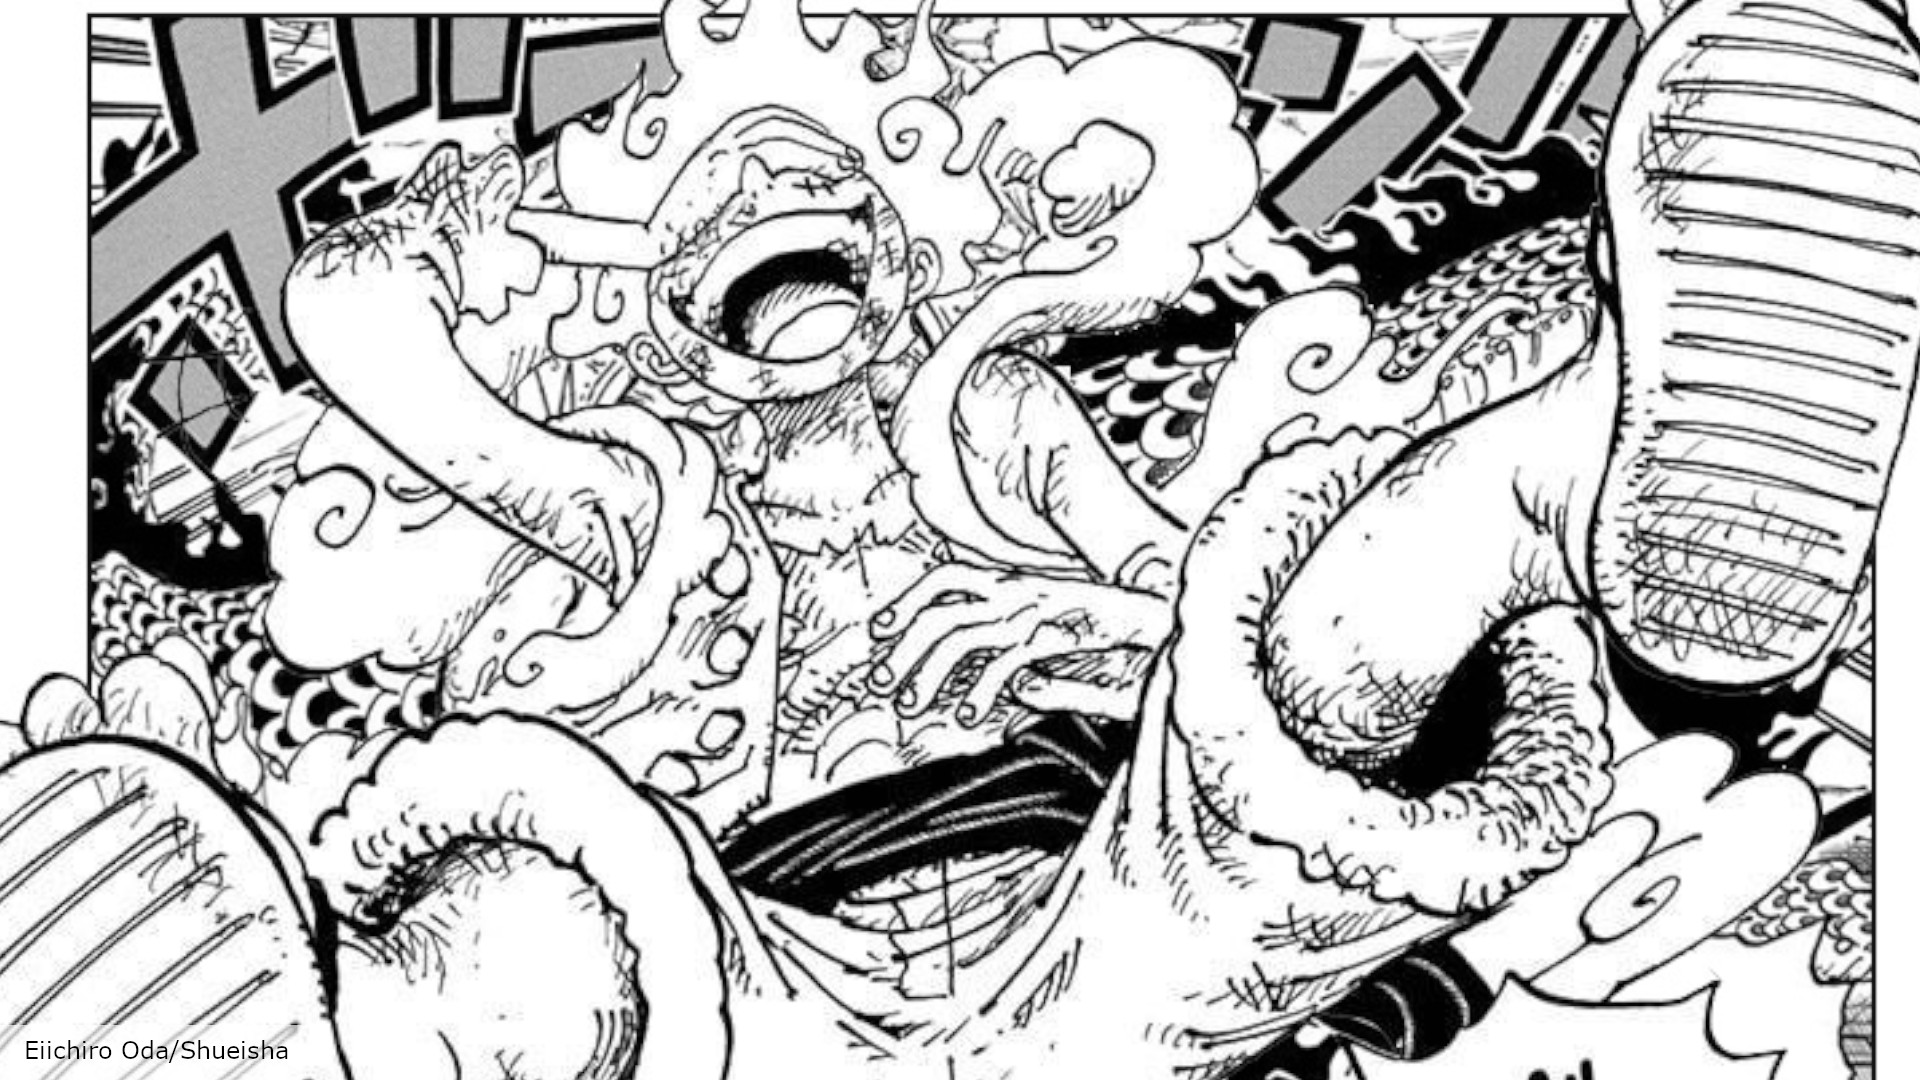 One Piece: Every time Luffy used Gear 5 in the manga, explained